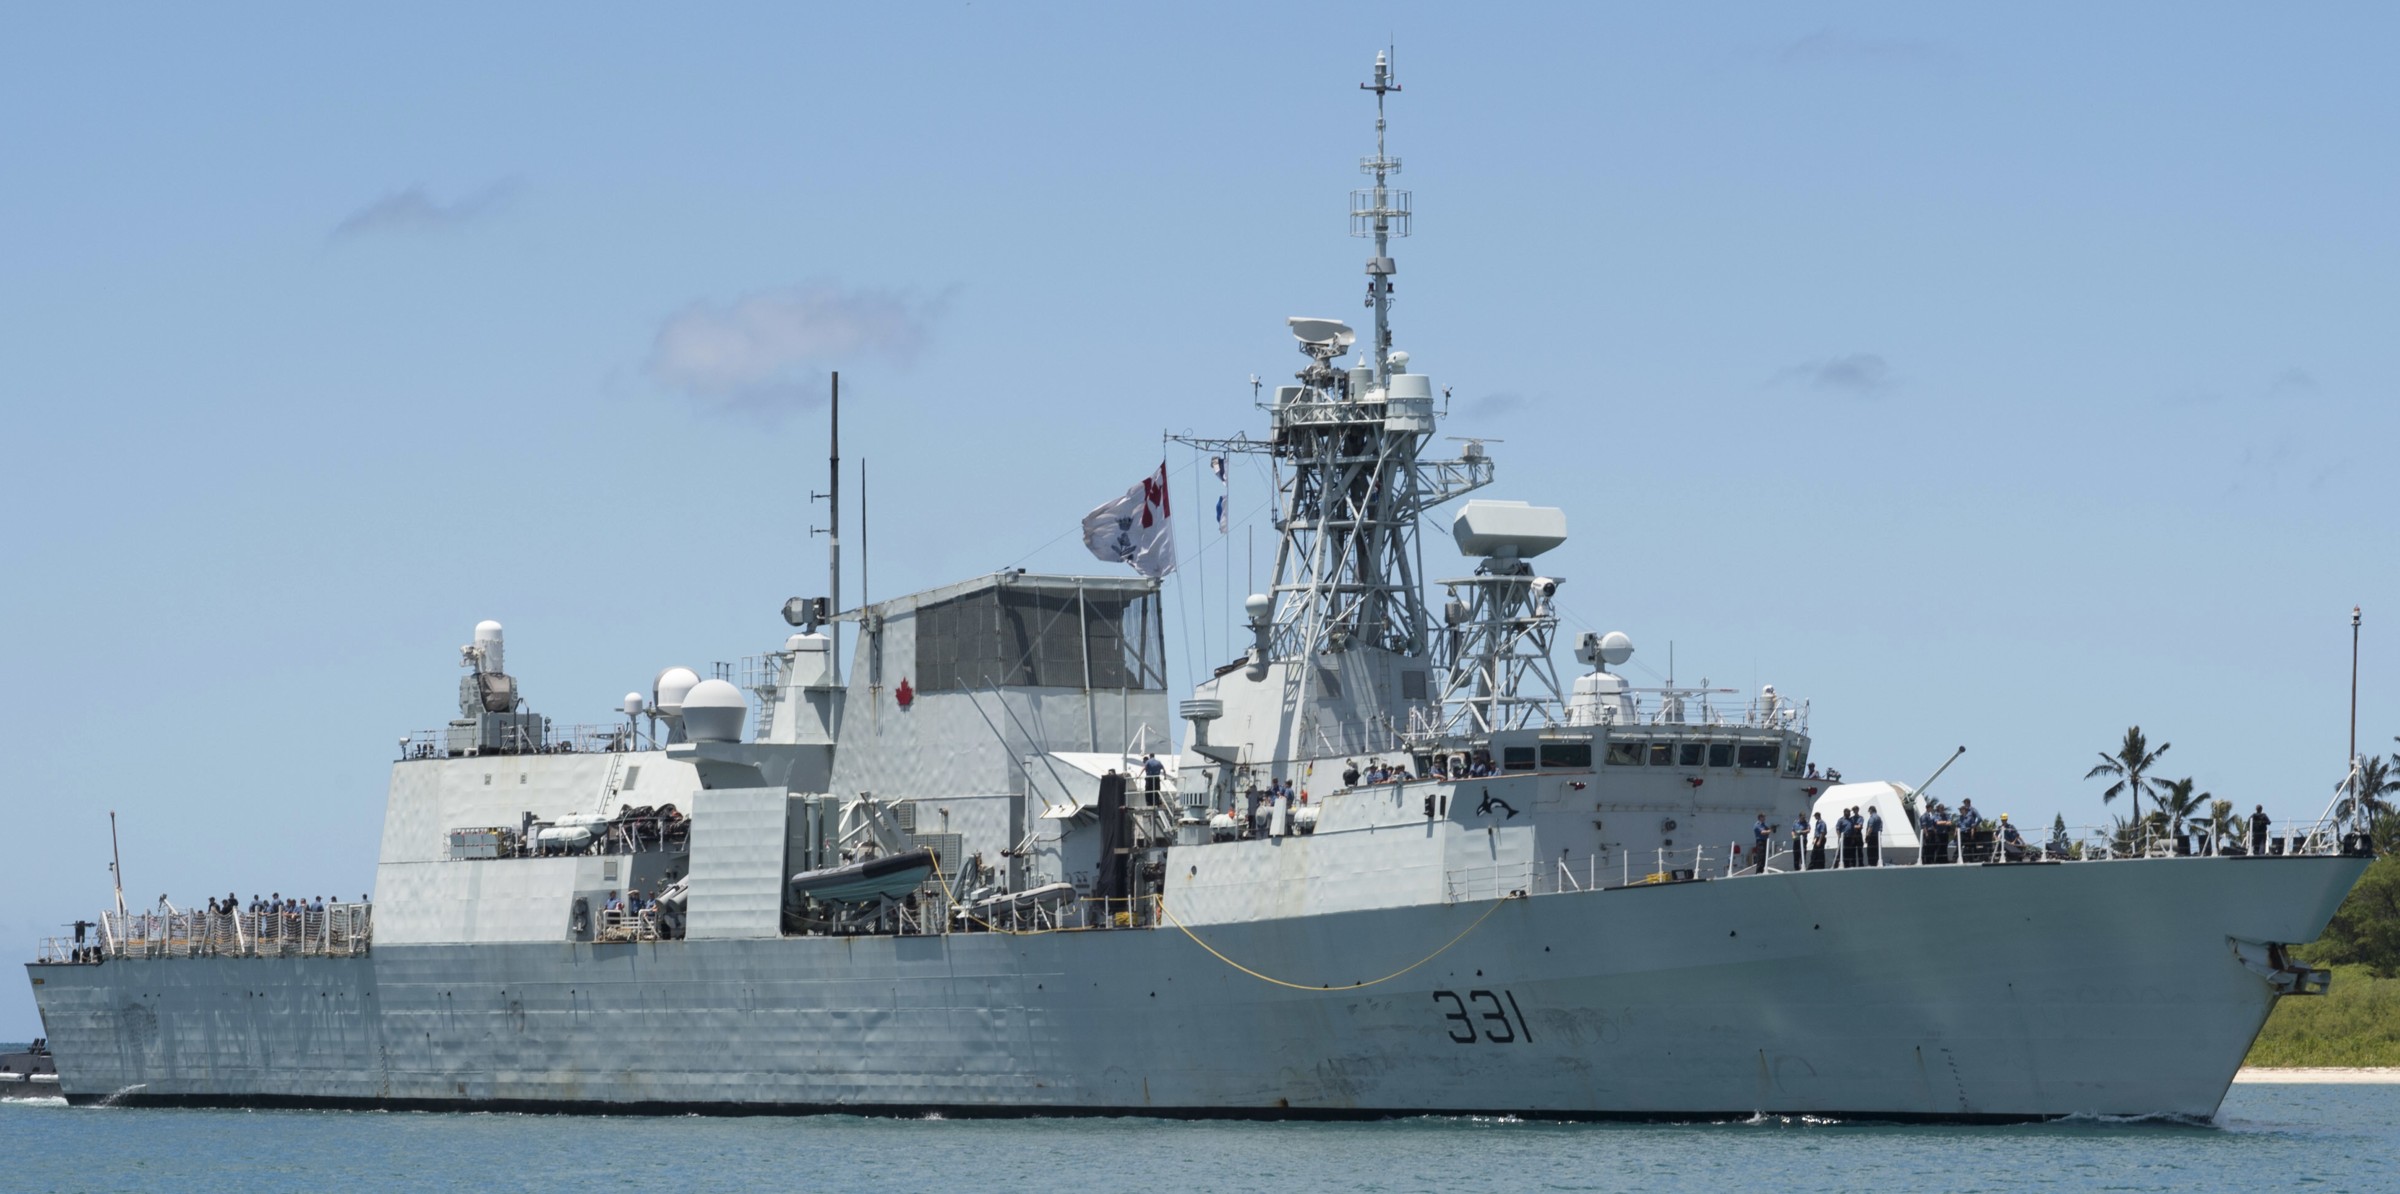 ffh-331 hmcs vancouver halifax class helicopter patrol frigate ncsm royal canadian navy 11 rimpac hawaii